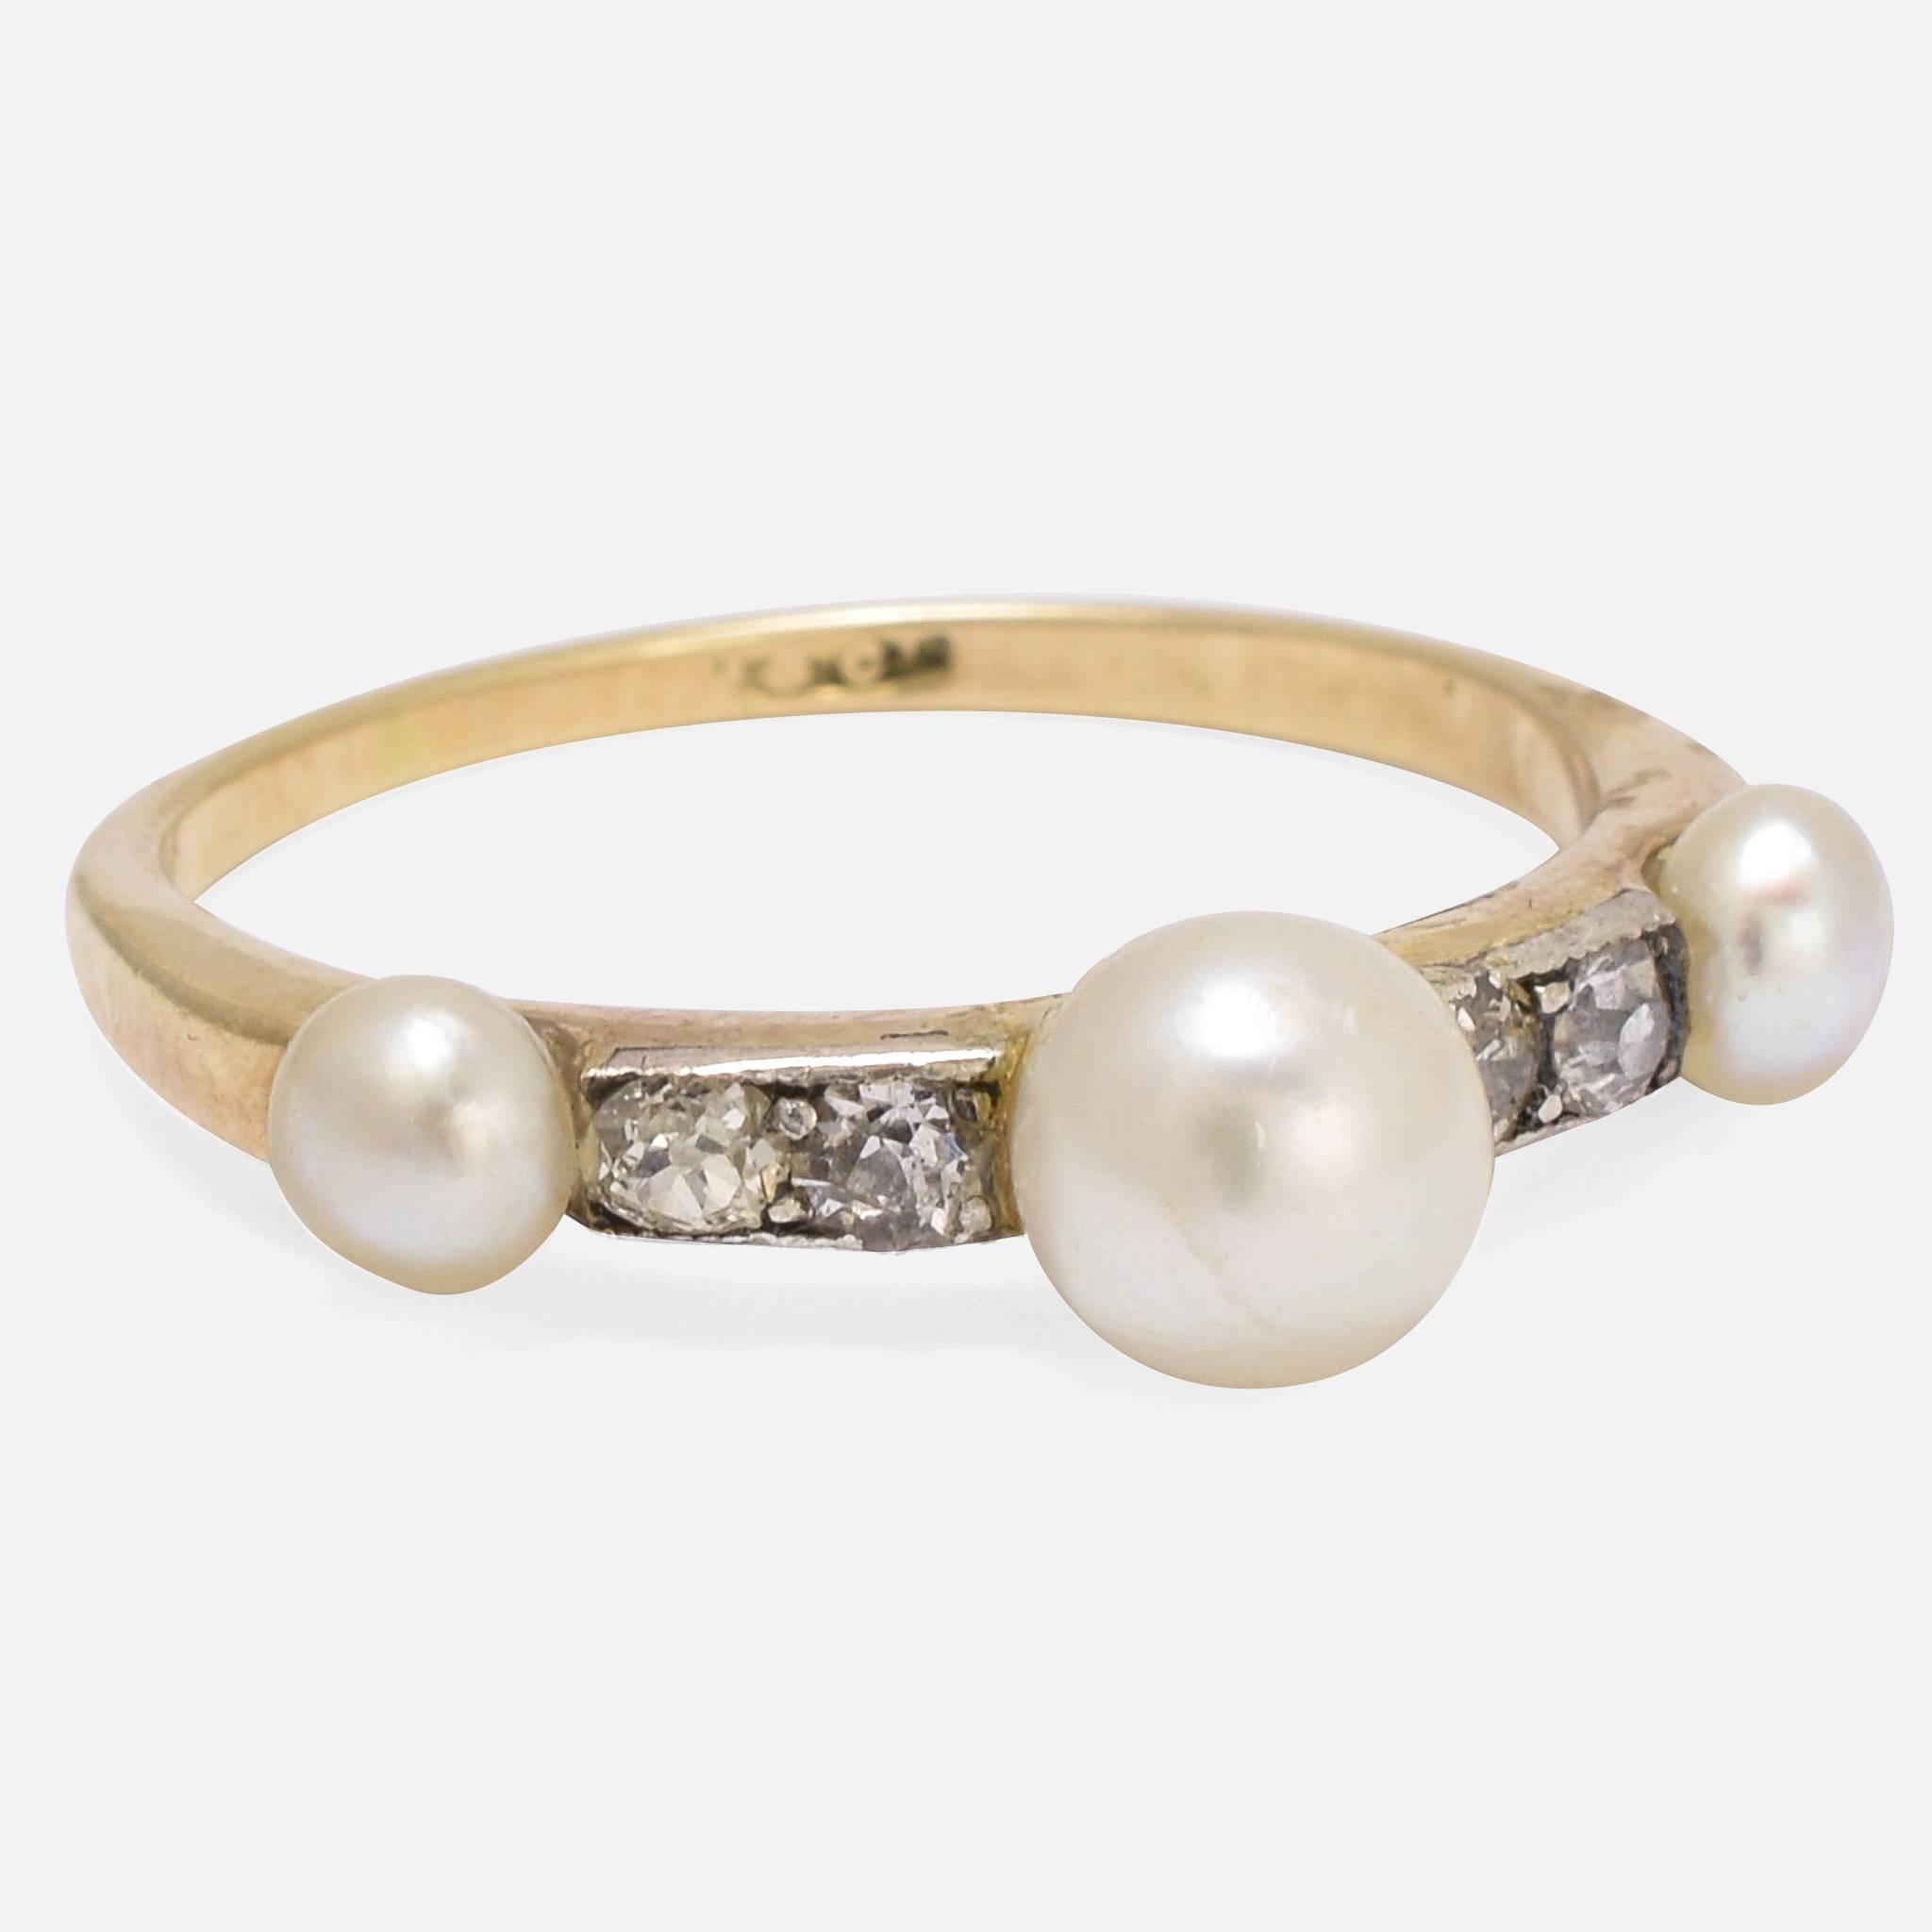 This stylish Edwardian era ring is set with pearls and old cut diamonds. It's modelled in 18k gold and platinum, and is ideal for stacking. Ring size: 6.25.